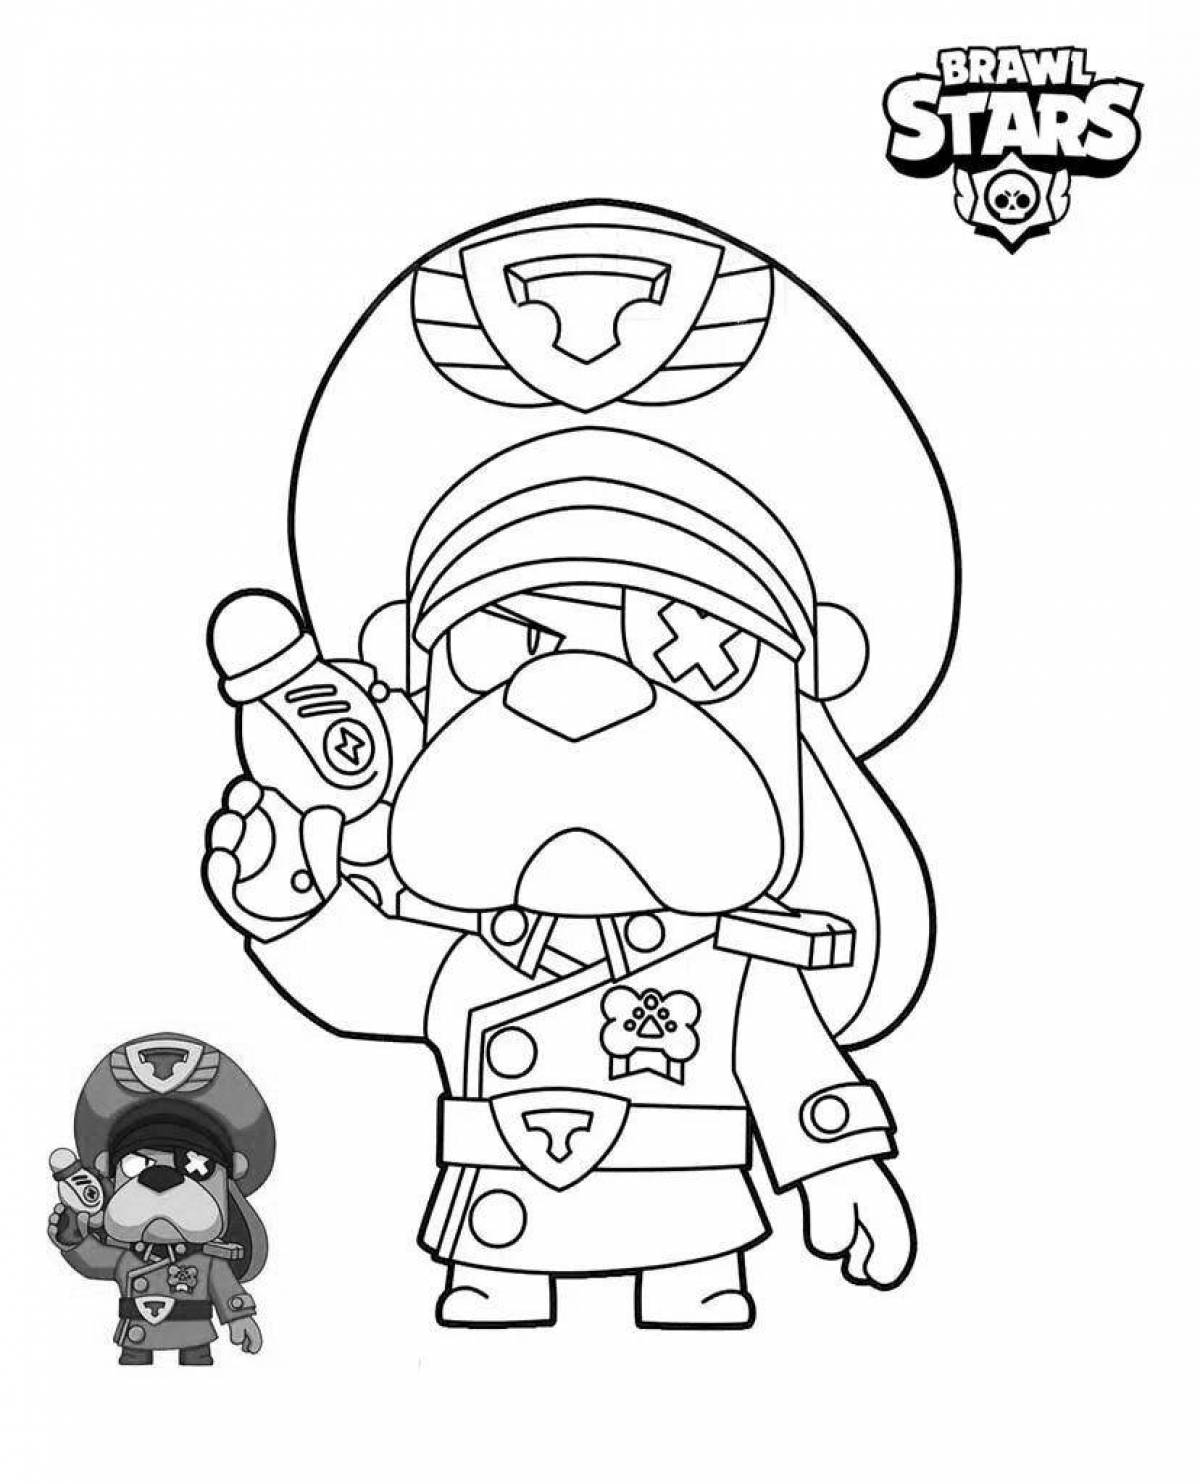 Cute buster brawl stars coloring page